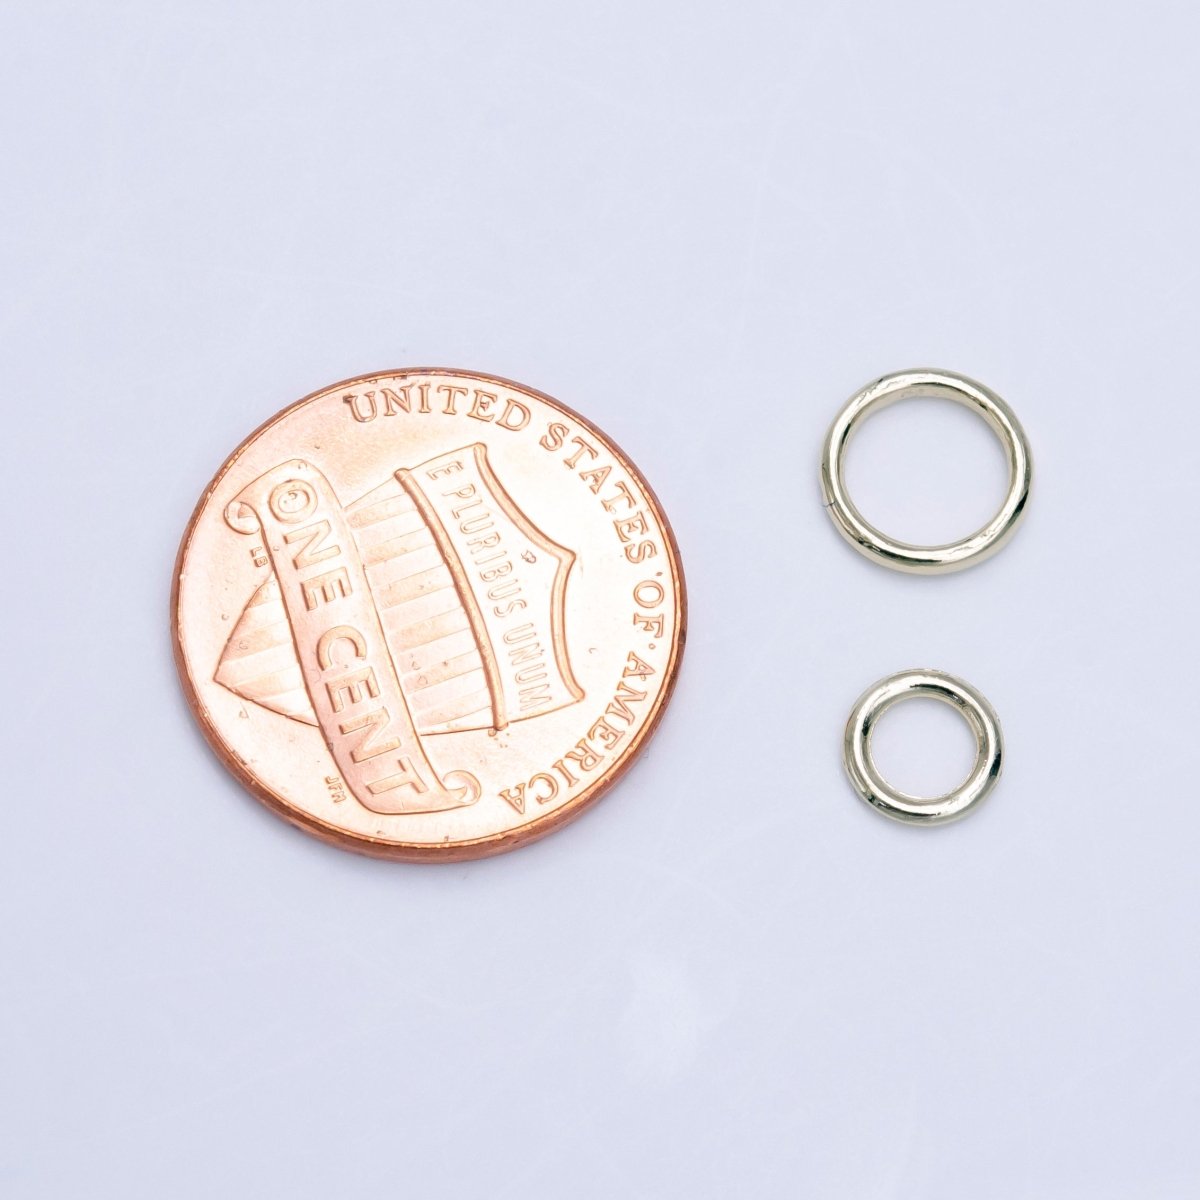 14K Gold Filled 6mm, 8mm Soldered Close Jump Ring Jewelry Making Supply Pack | Z-908 Z-909 - DLUXCA